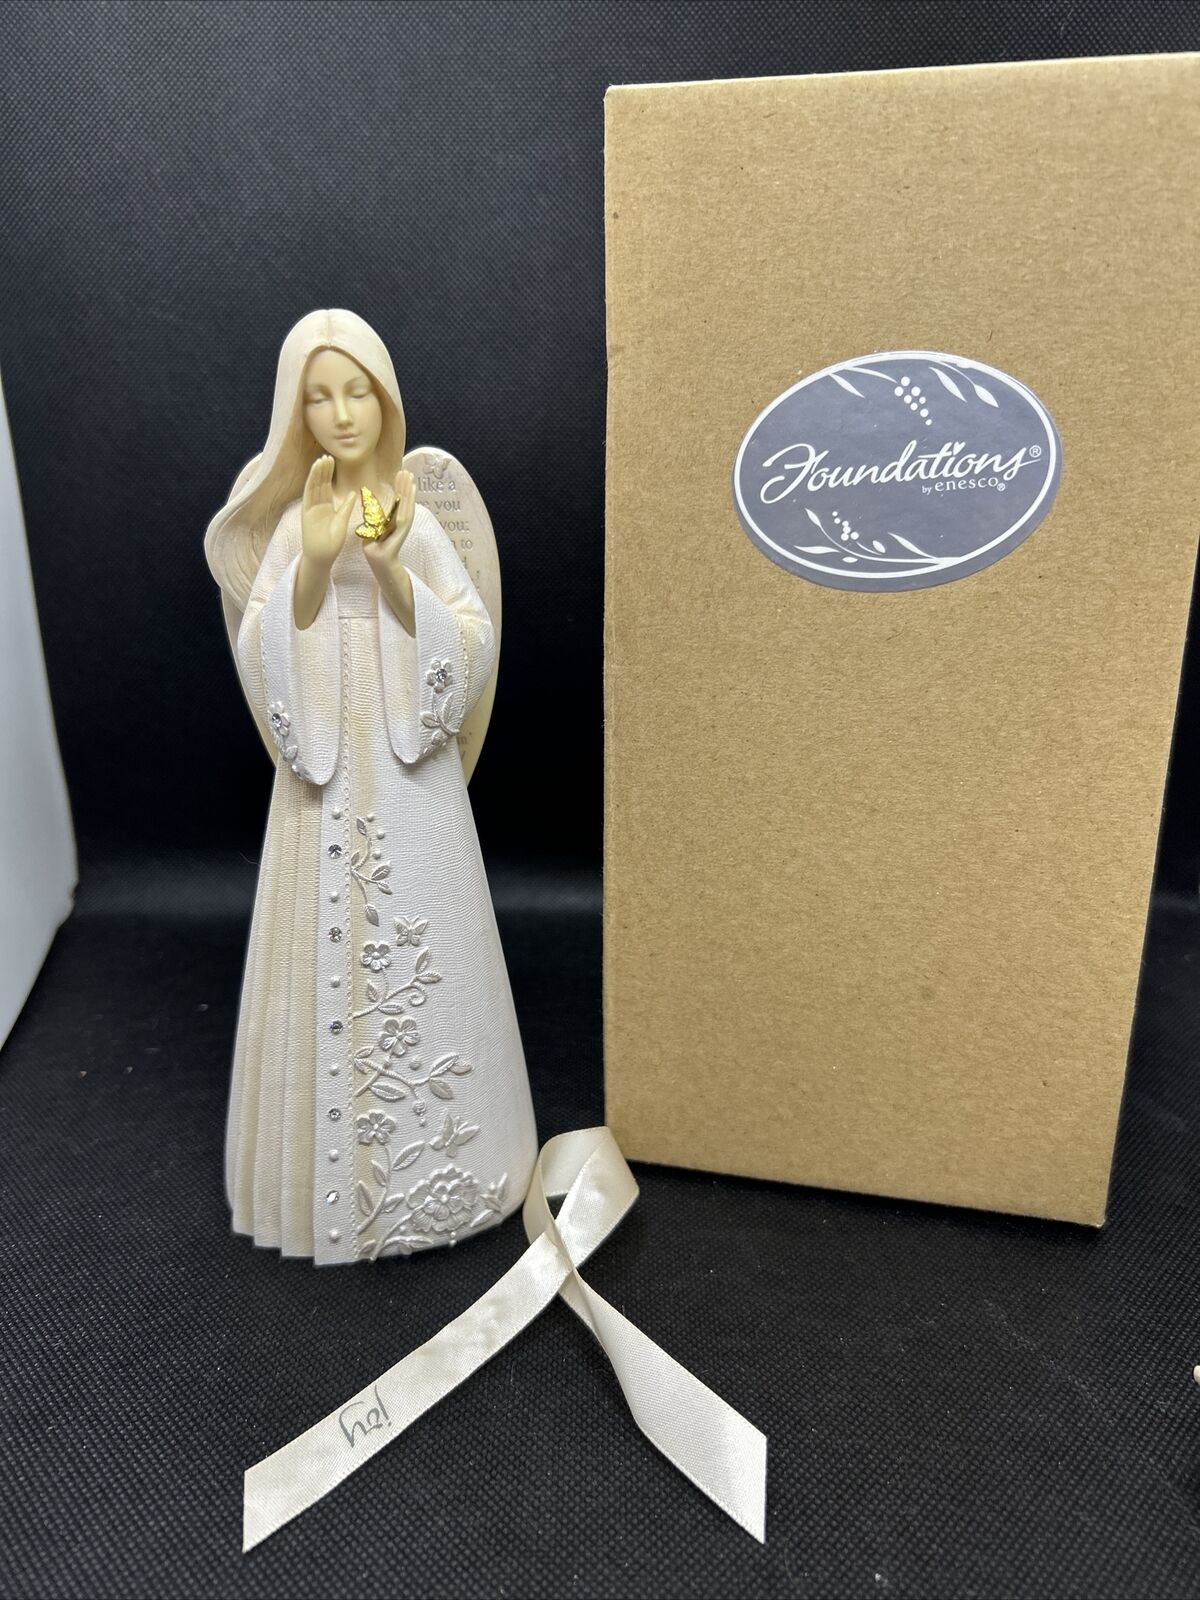 Foundations Angel with Butterfly Figurine 7.6 Inches High 4055278